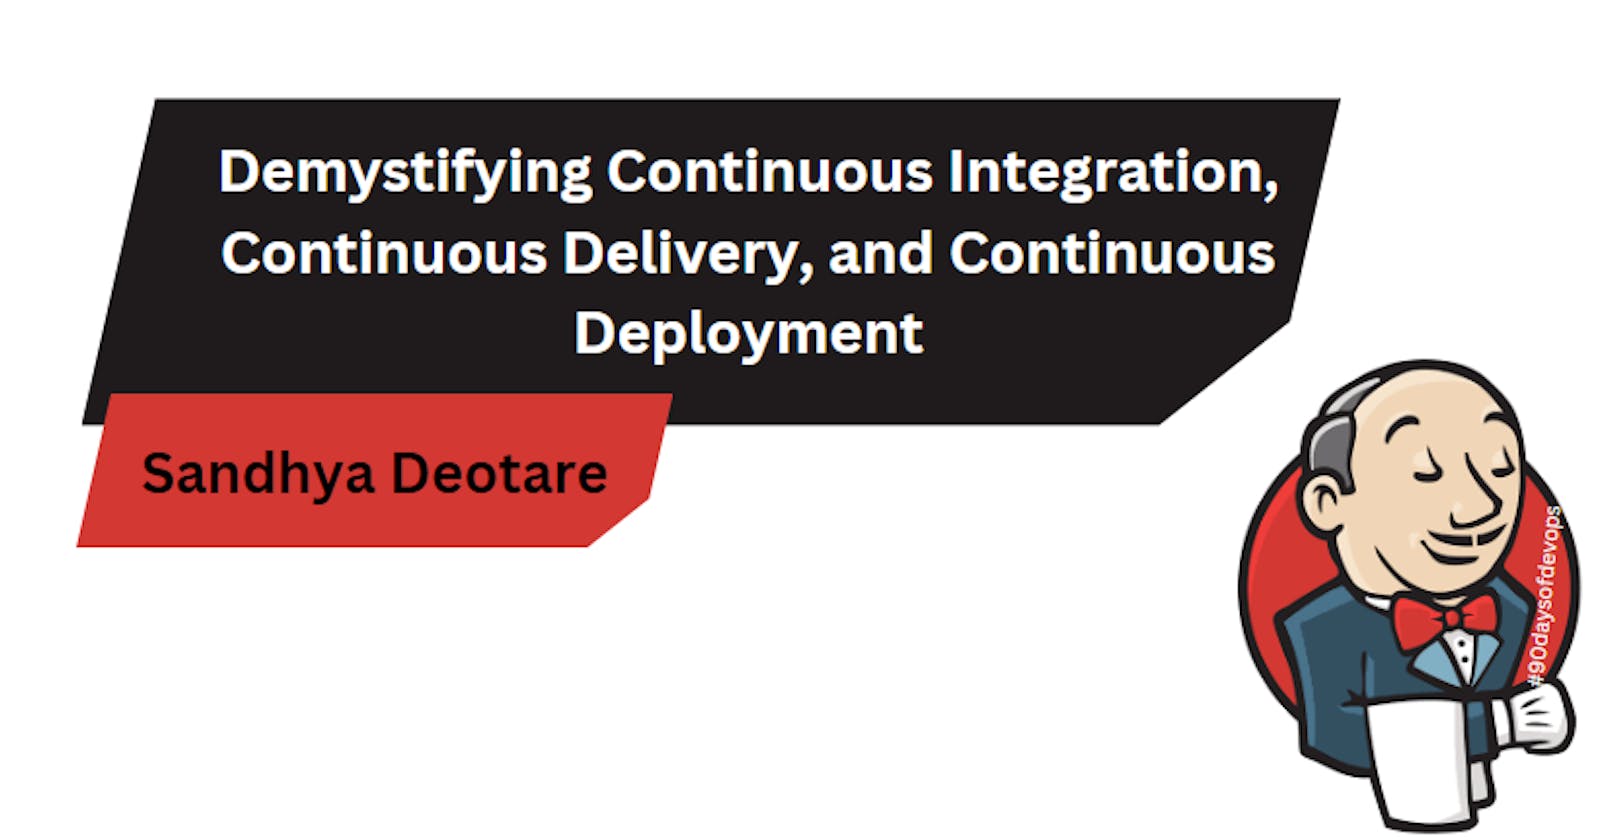 Demystifying Continuous Integration, Continuous Delivery, and Continuous Deployment in Jenkins